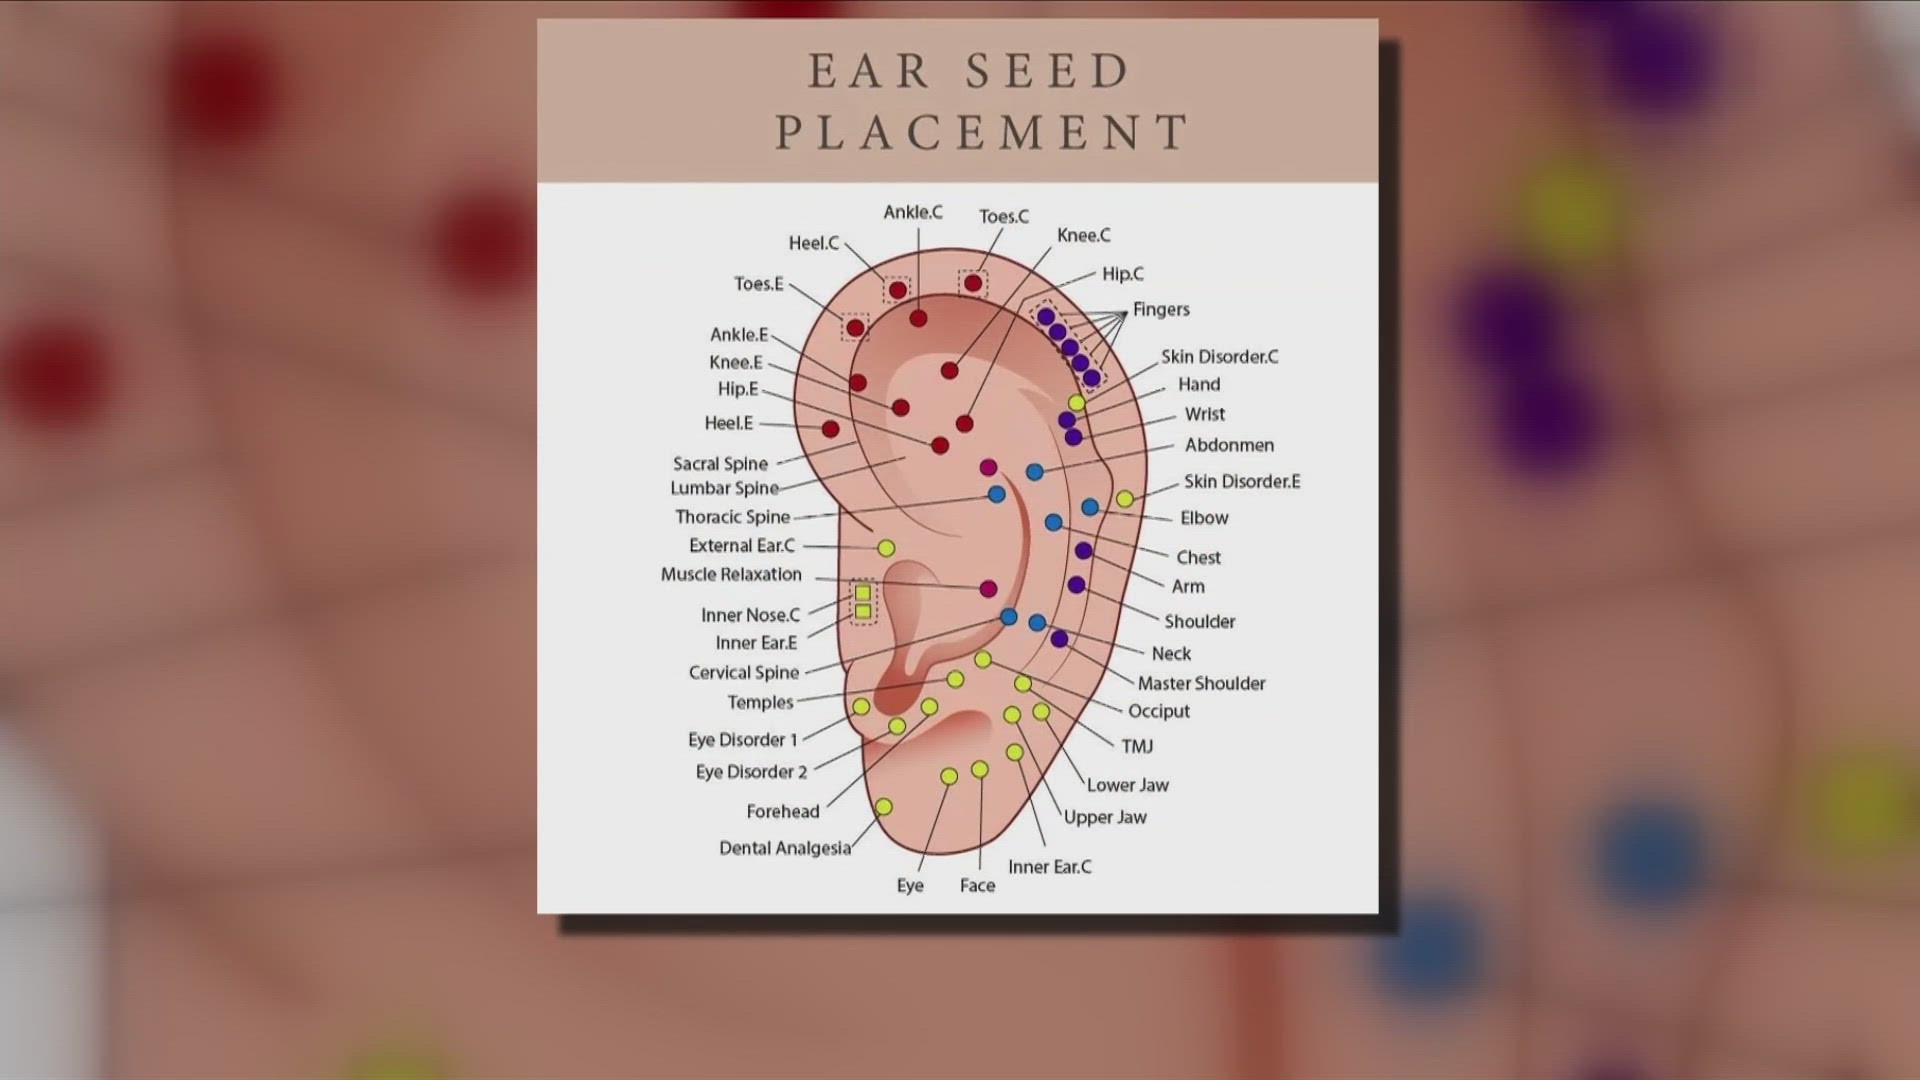 A Mid-South specialist shows how acupuncture can be used to treat allergies.